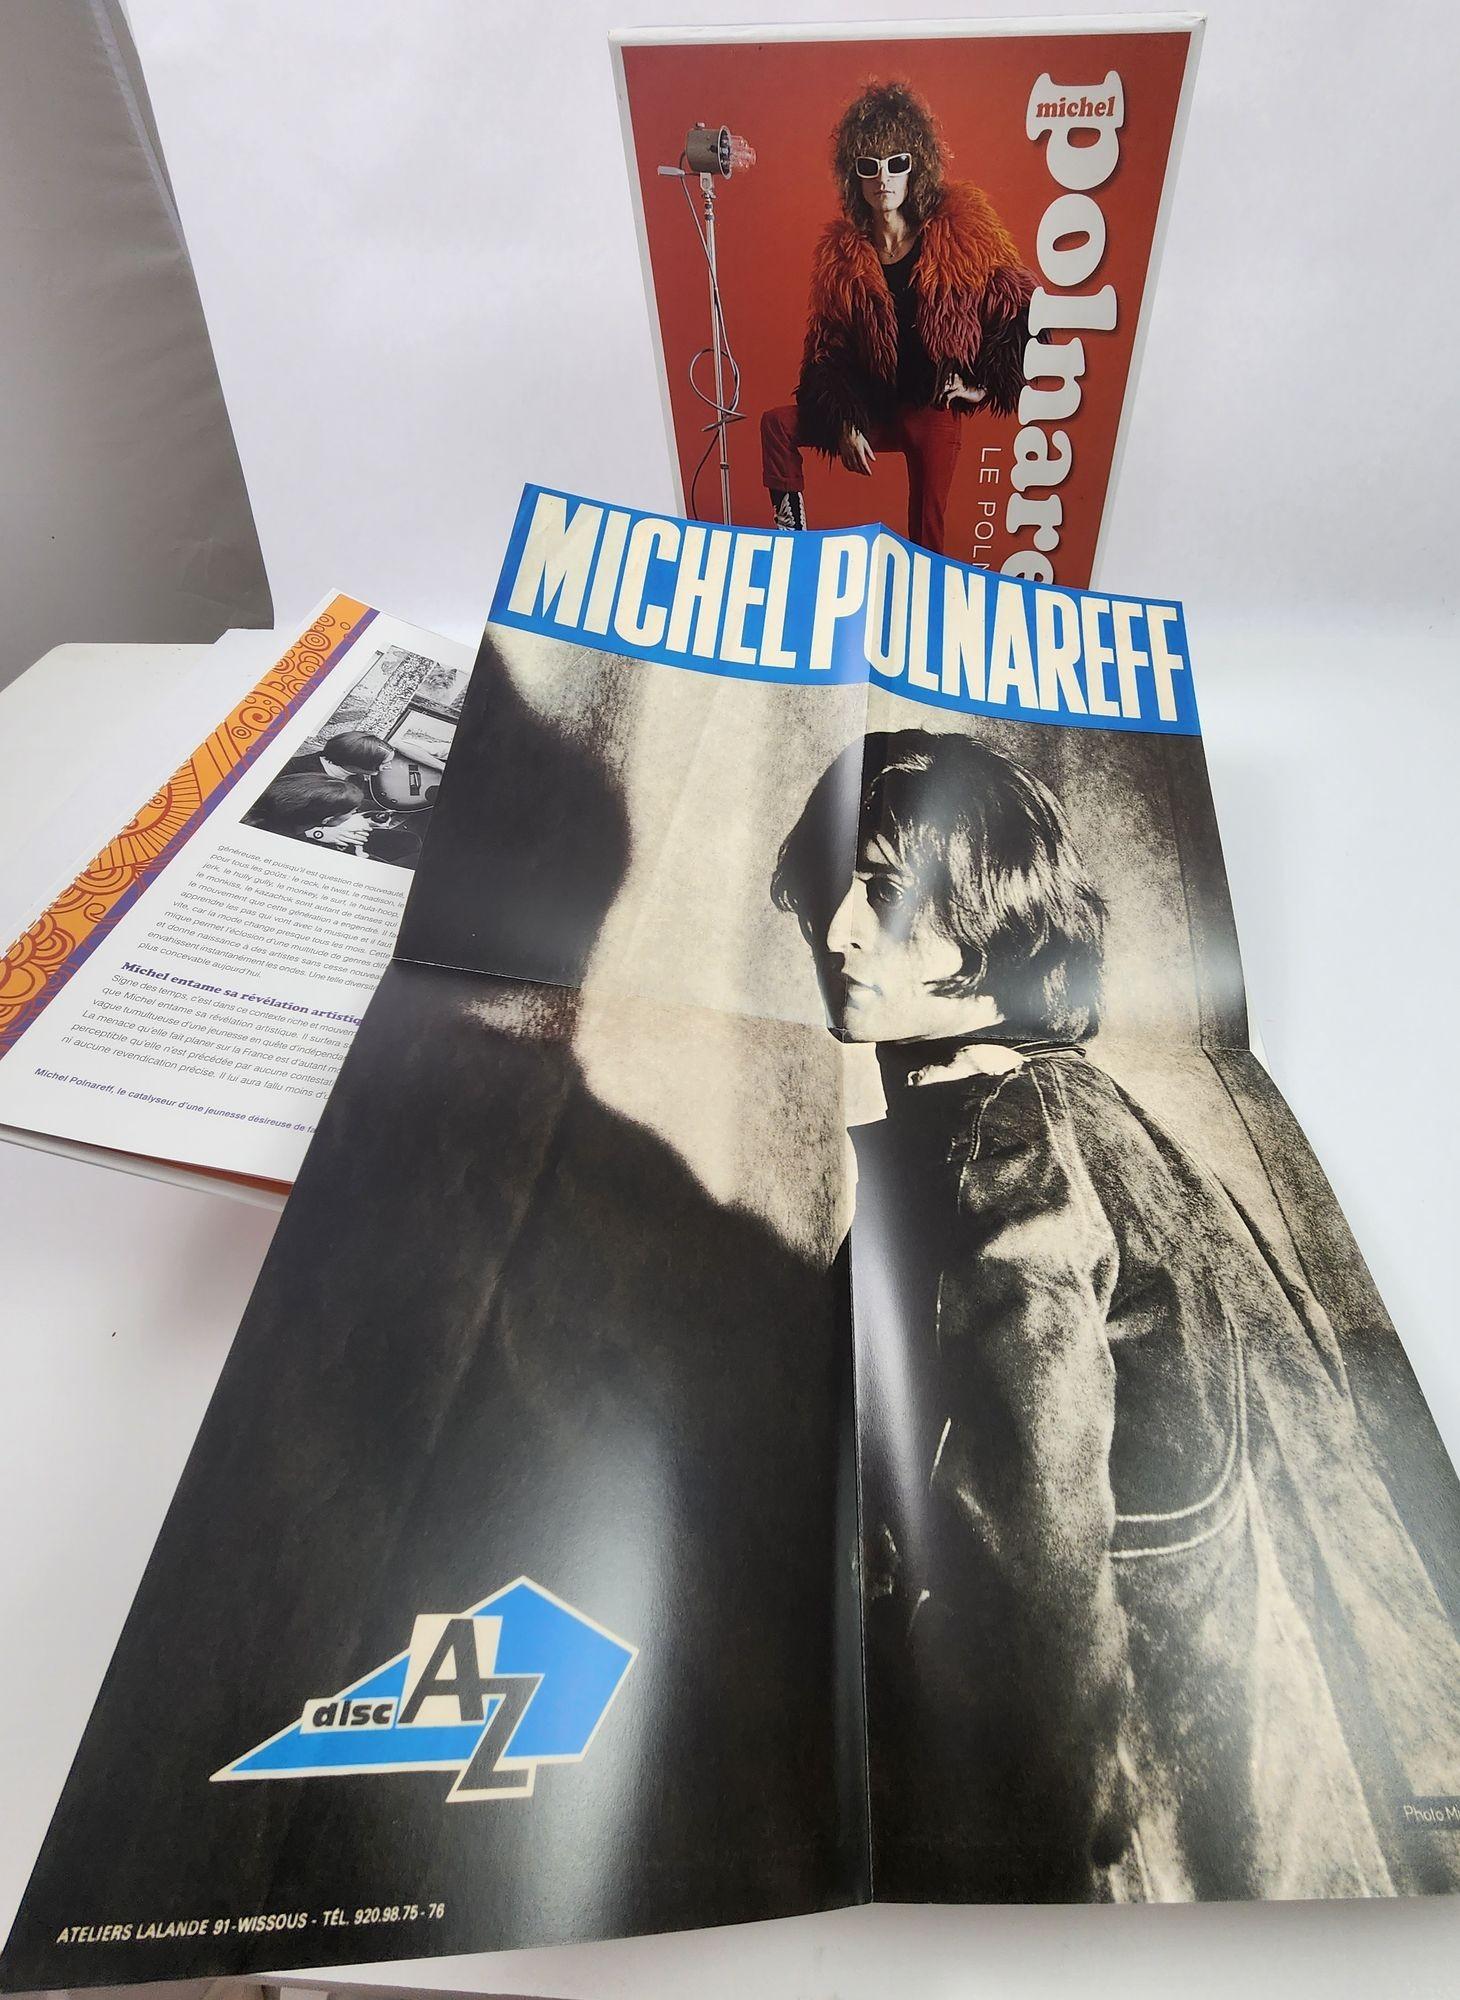 Paper Le Polnabook Michel Polnareff French Edition Hardcover Book in Sleeve For Sale